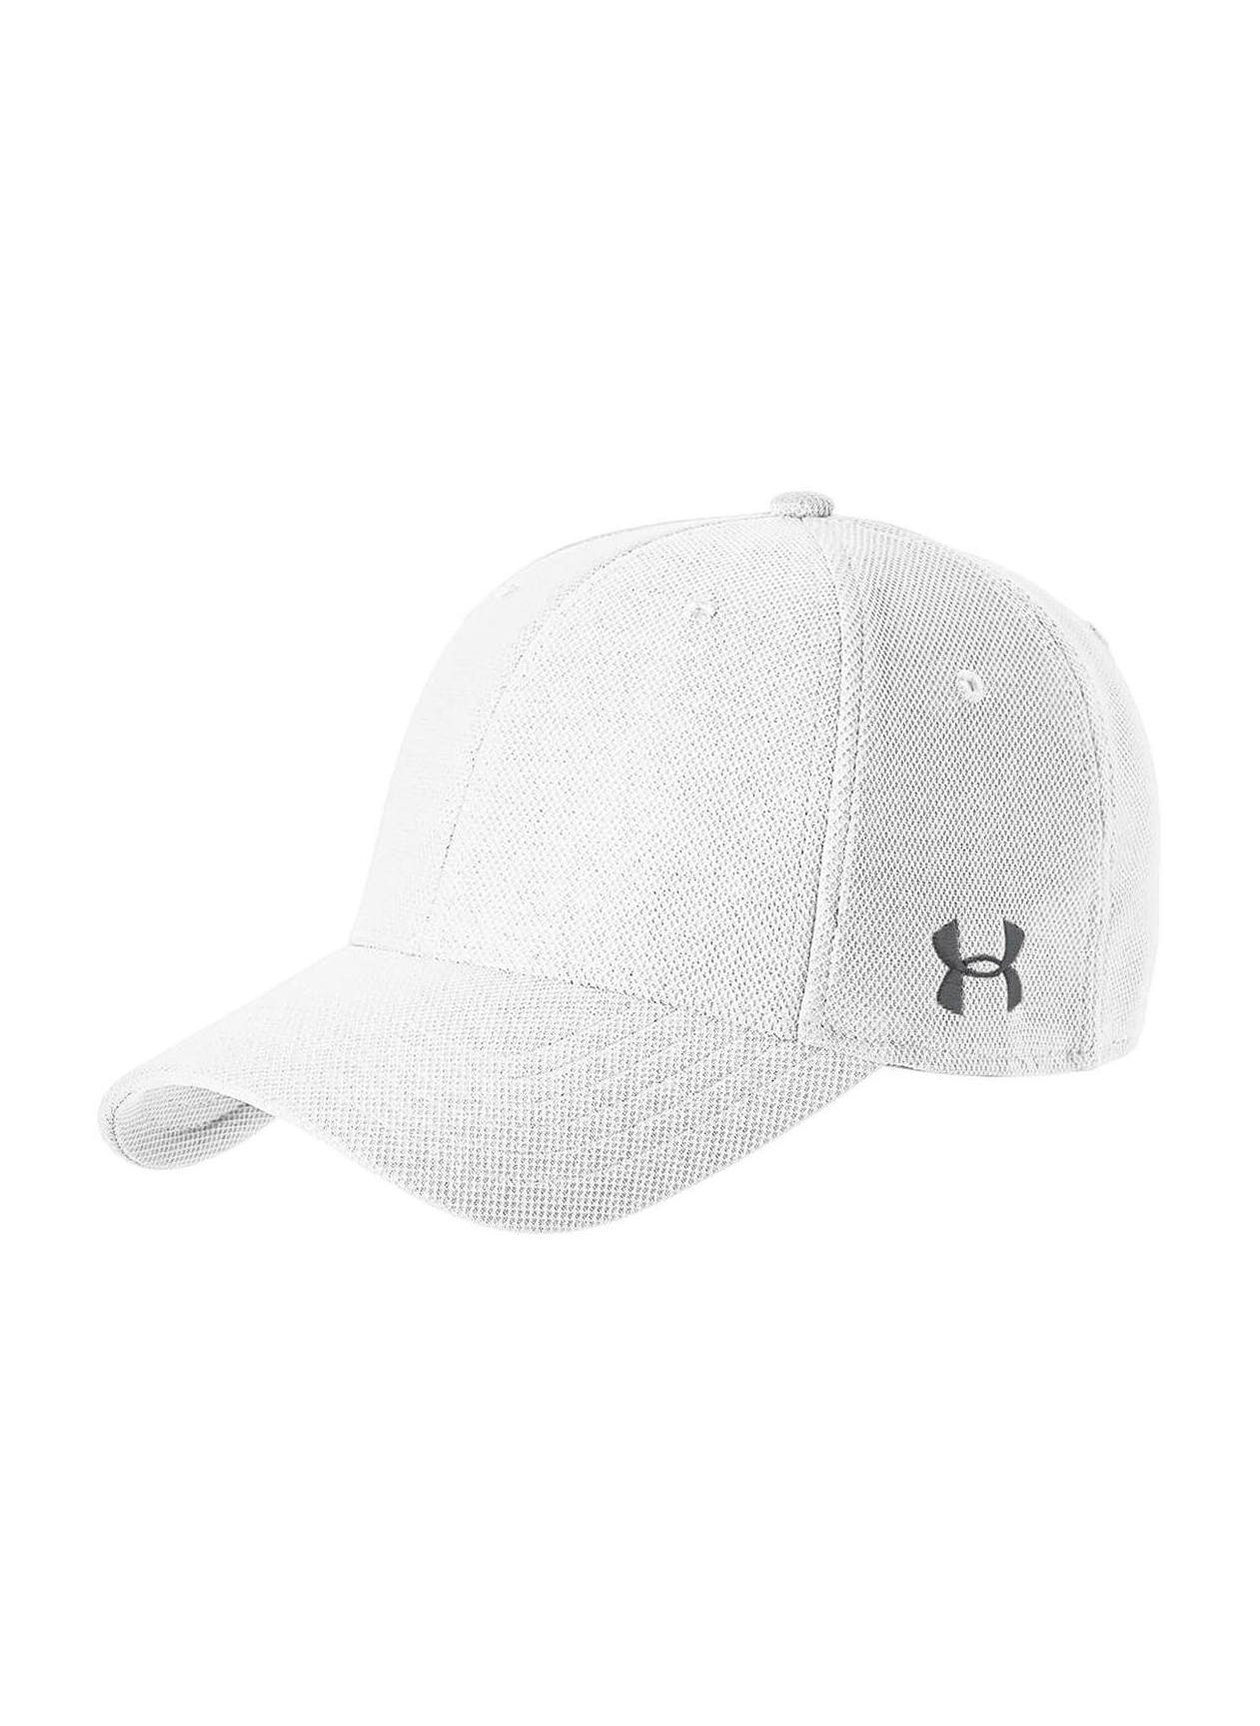 Under Armour® Blitzing Hat - Men's Hats in White Camo